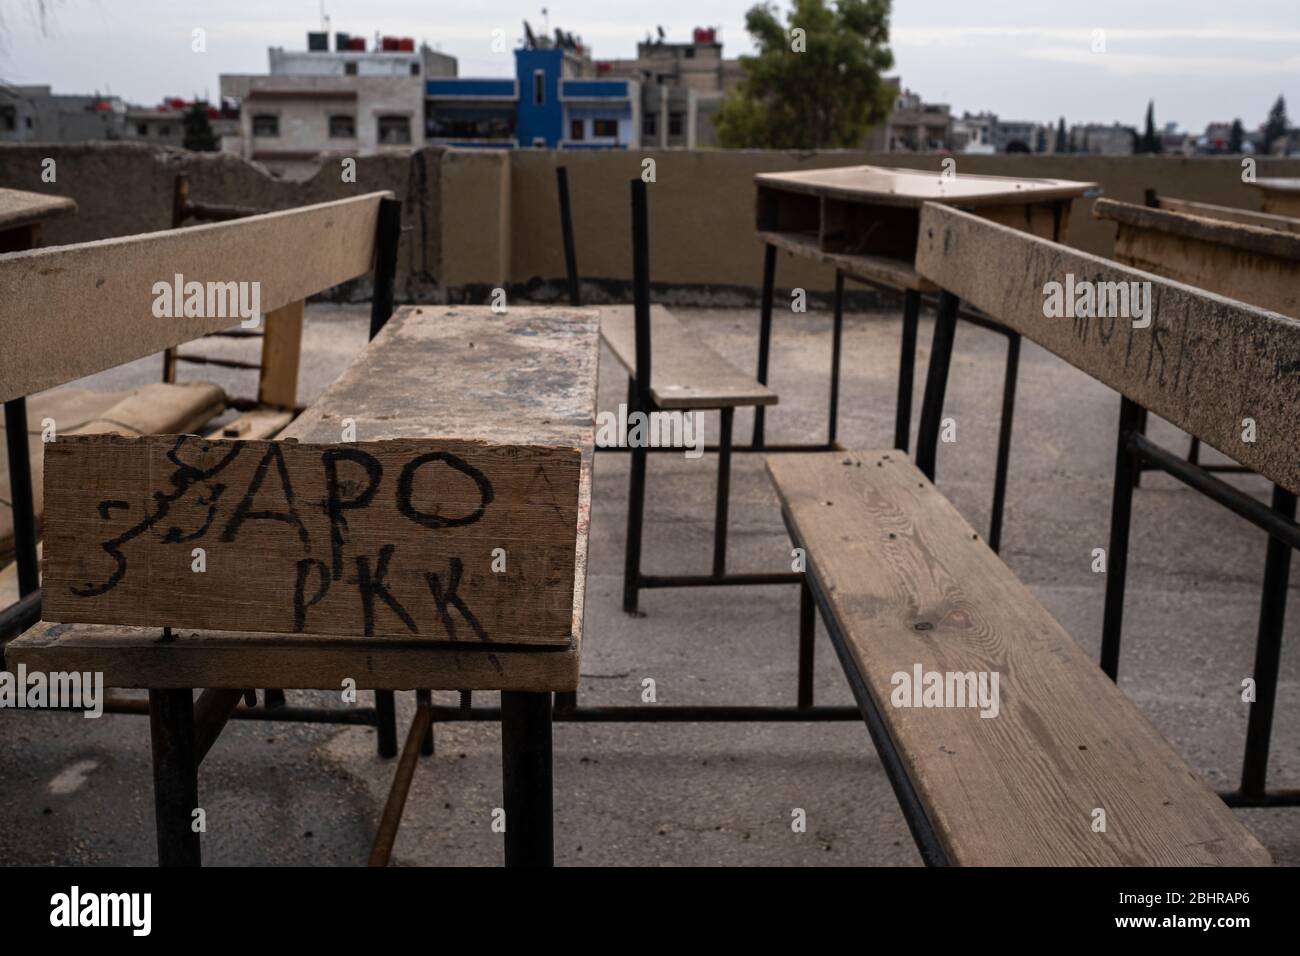 The relationship between education and politics is complex in Qamishli, North-East Syria. Old and broken tables are marked with graffiti for the PKK and Abdullah Ocalan, either terrorists or visionaries depending upon your perspective. Stock Photo